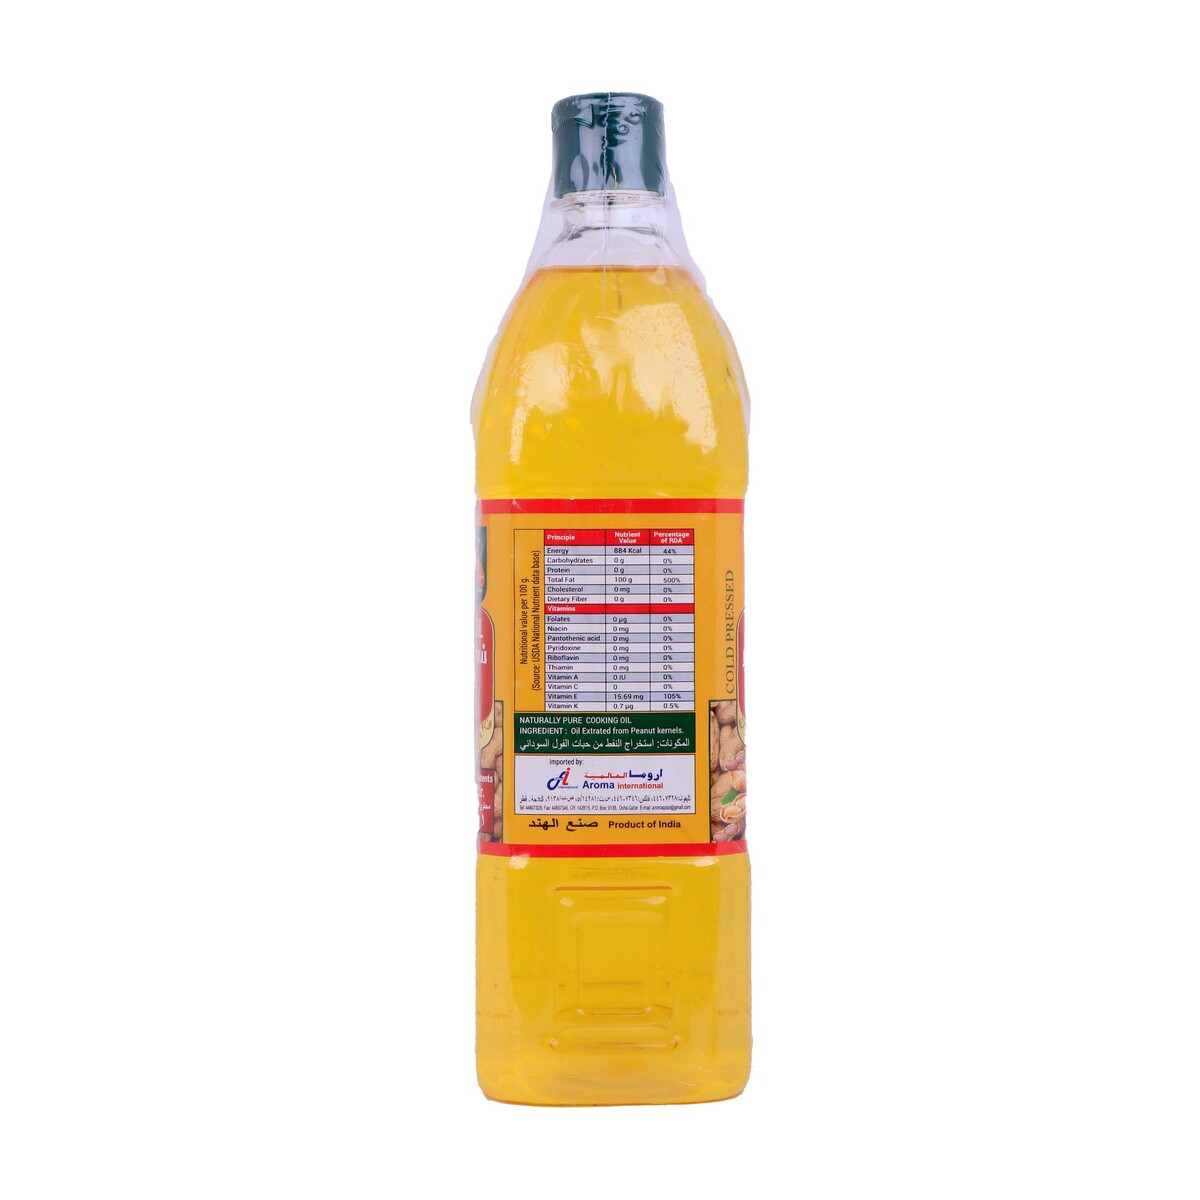 Royal Chef Ground Nut Oil 1Litre